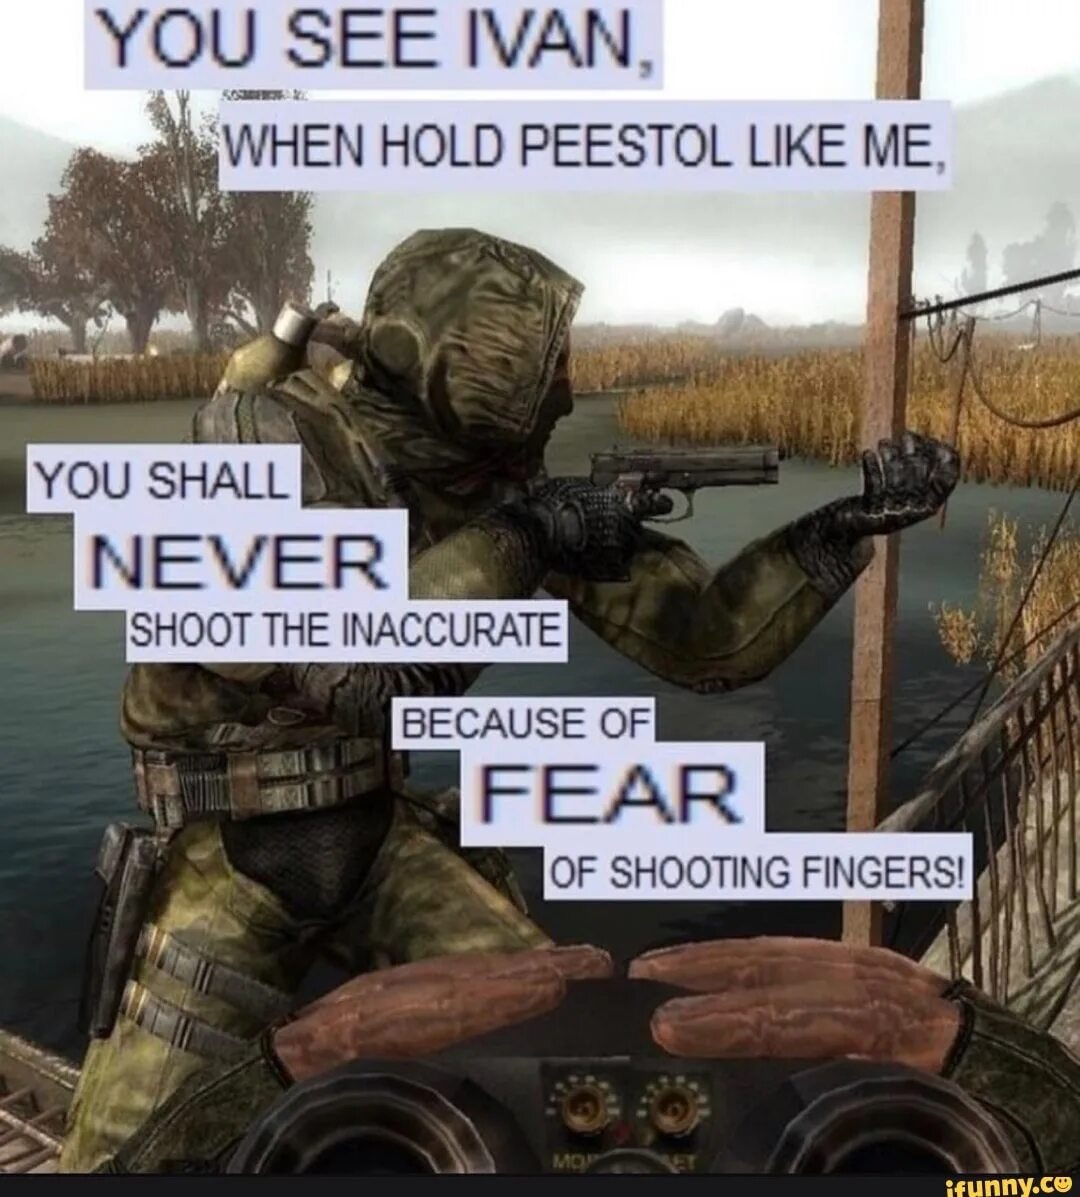 You see him yet. You see Ivan when holding Peestol. Ivan memes. Мем see you. You see Ivan meme.